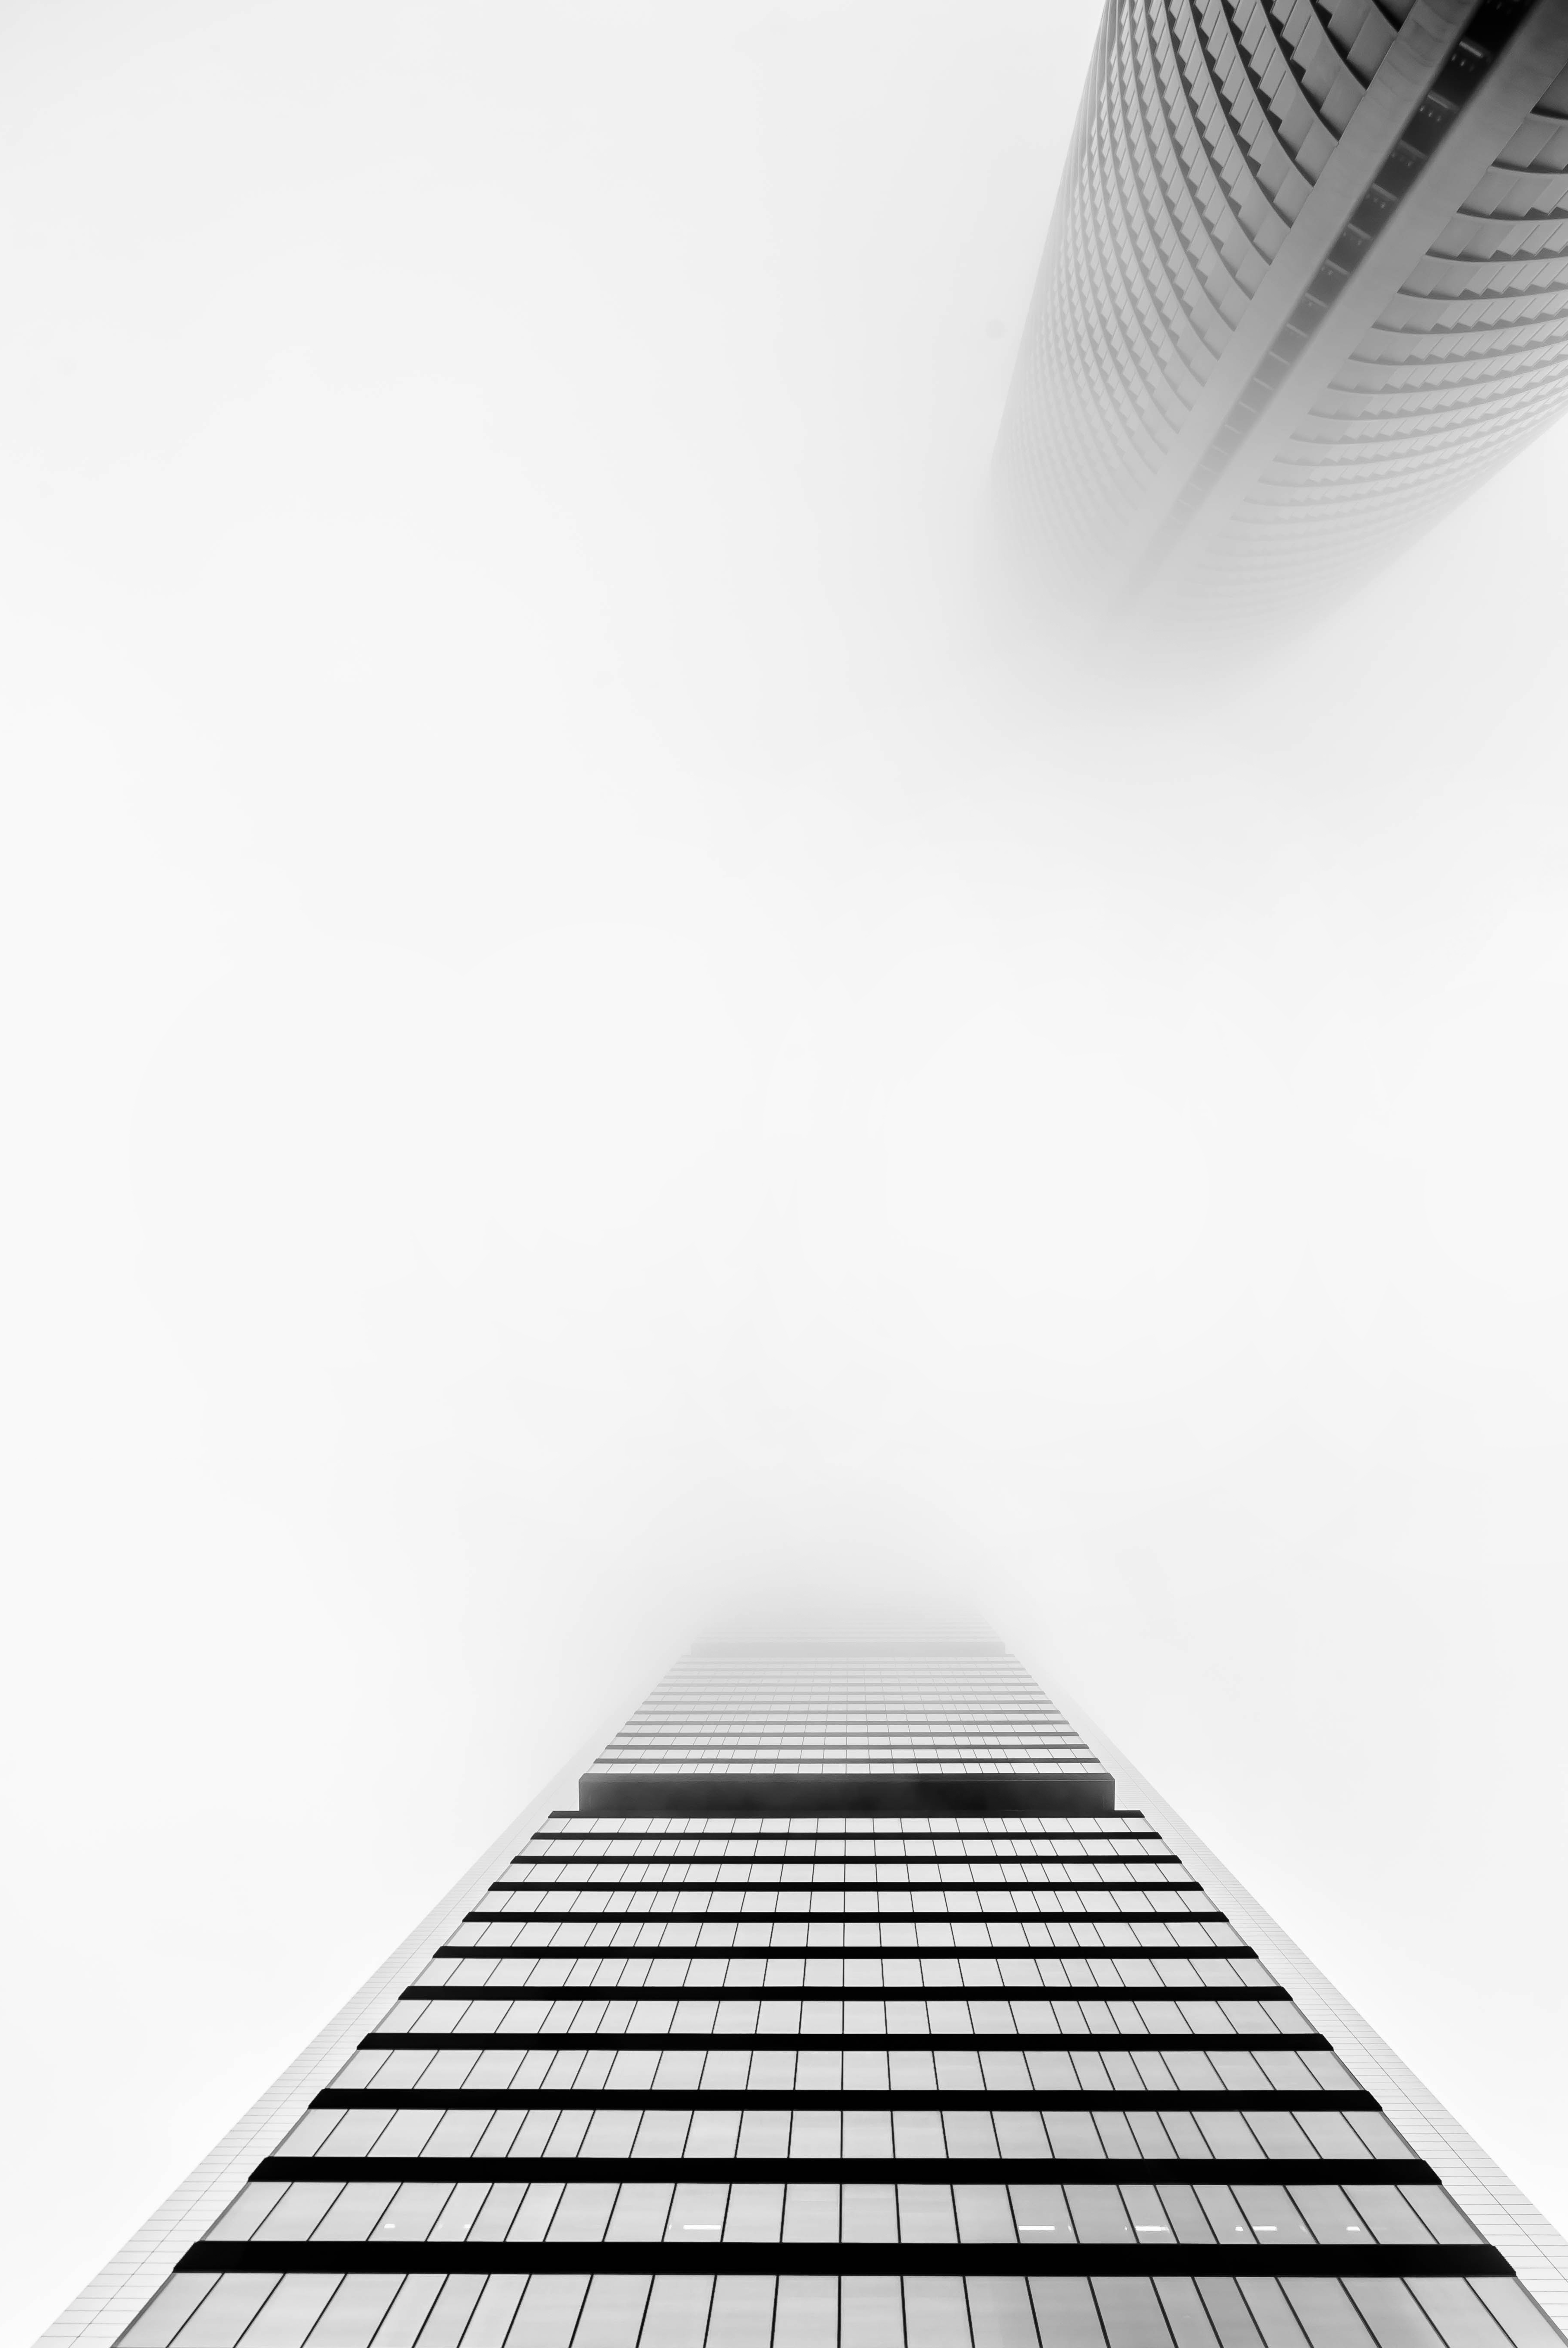 An abstract image of high rise buildings from the ground floor